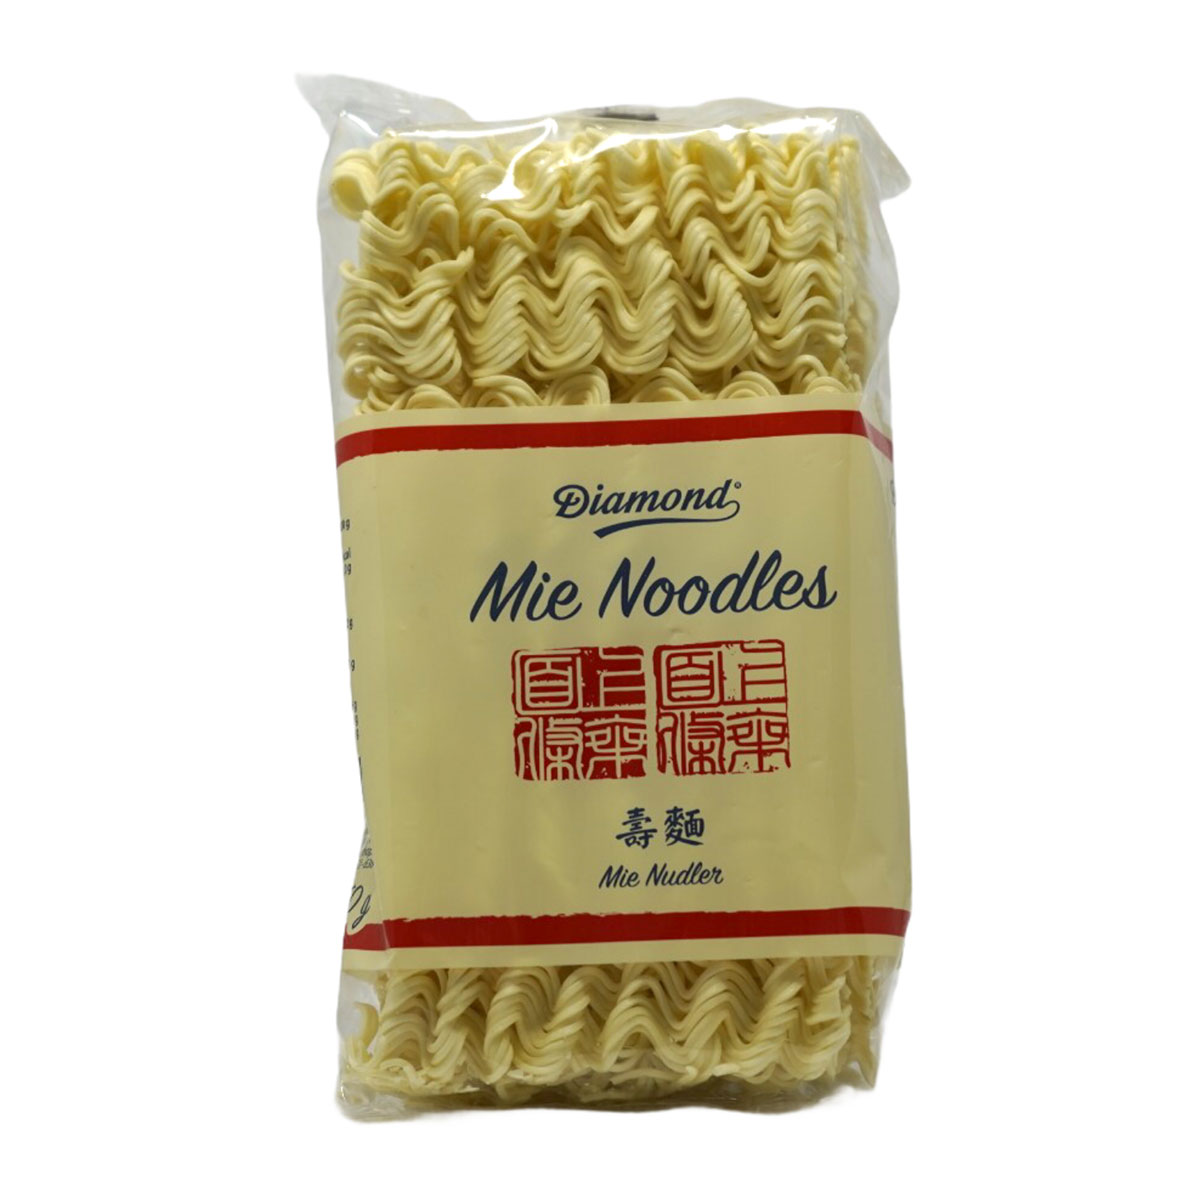 Mie Nudeln 250g